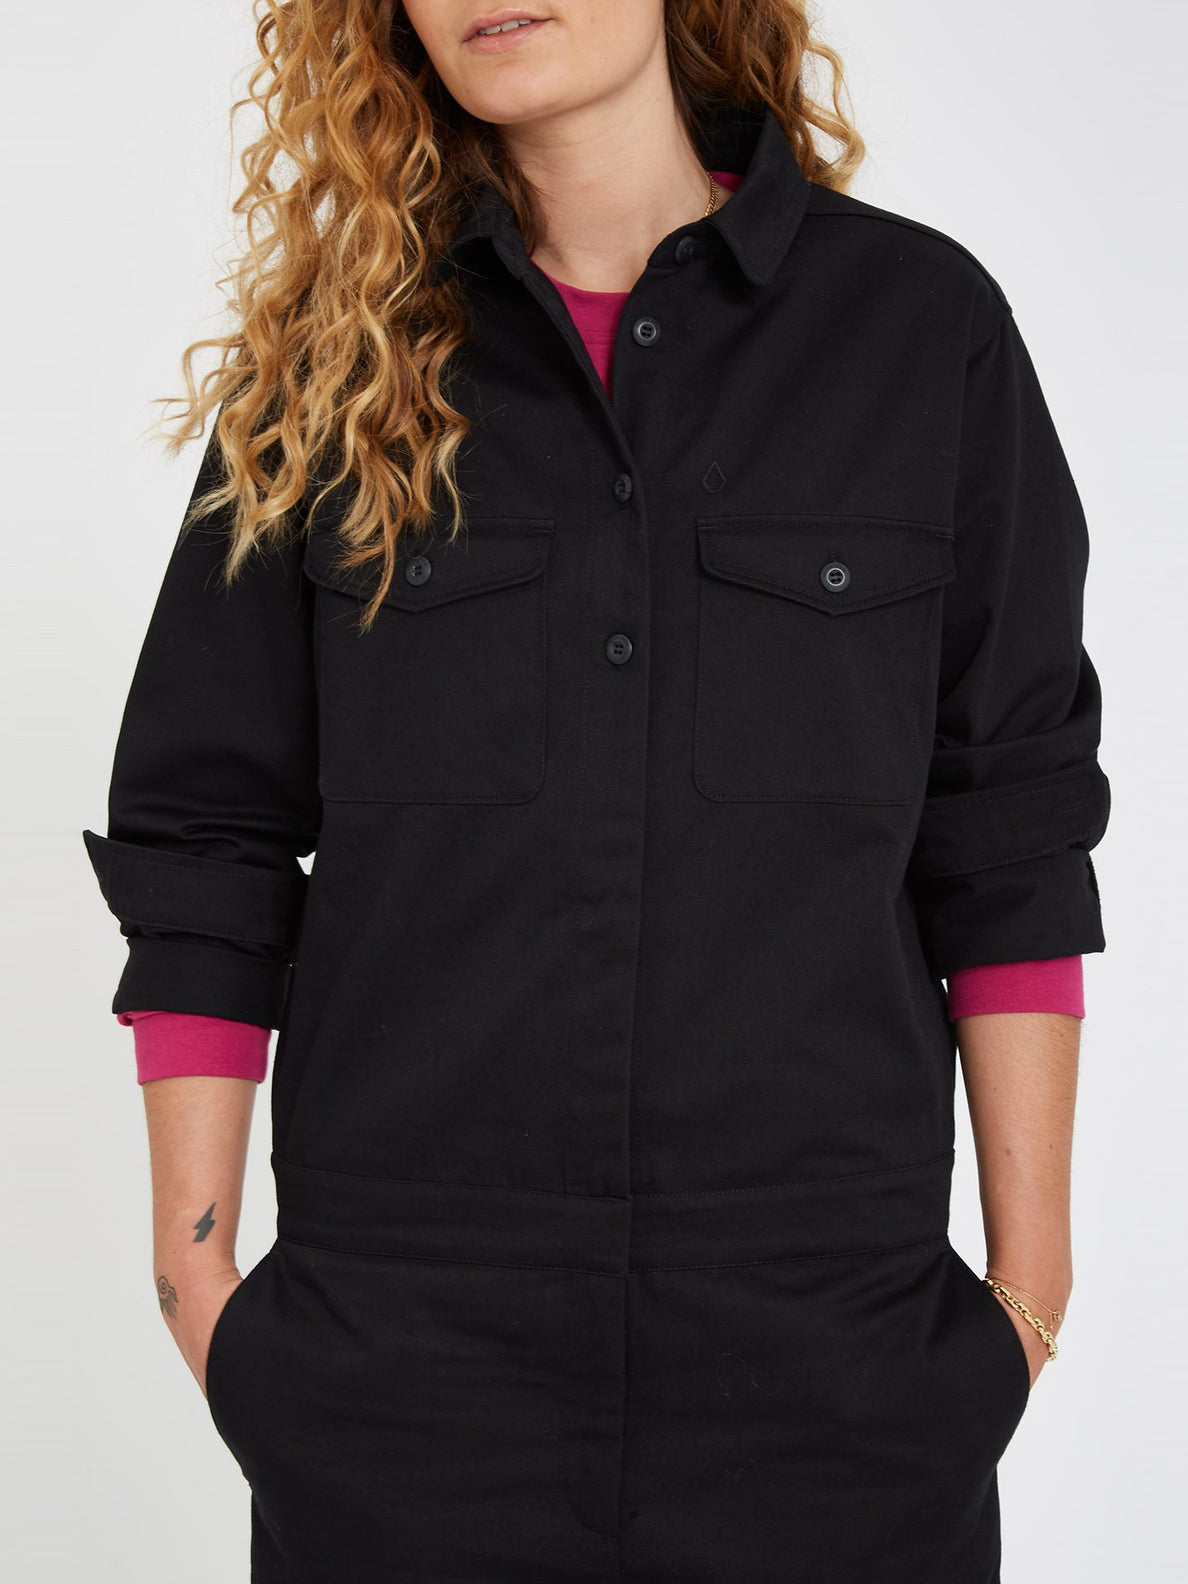 Whawhat Coverall - BLACK (B2832101_BLK) [2]